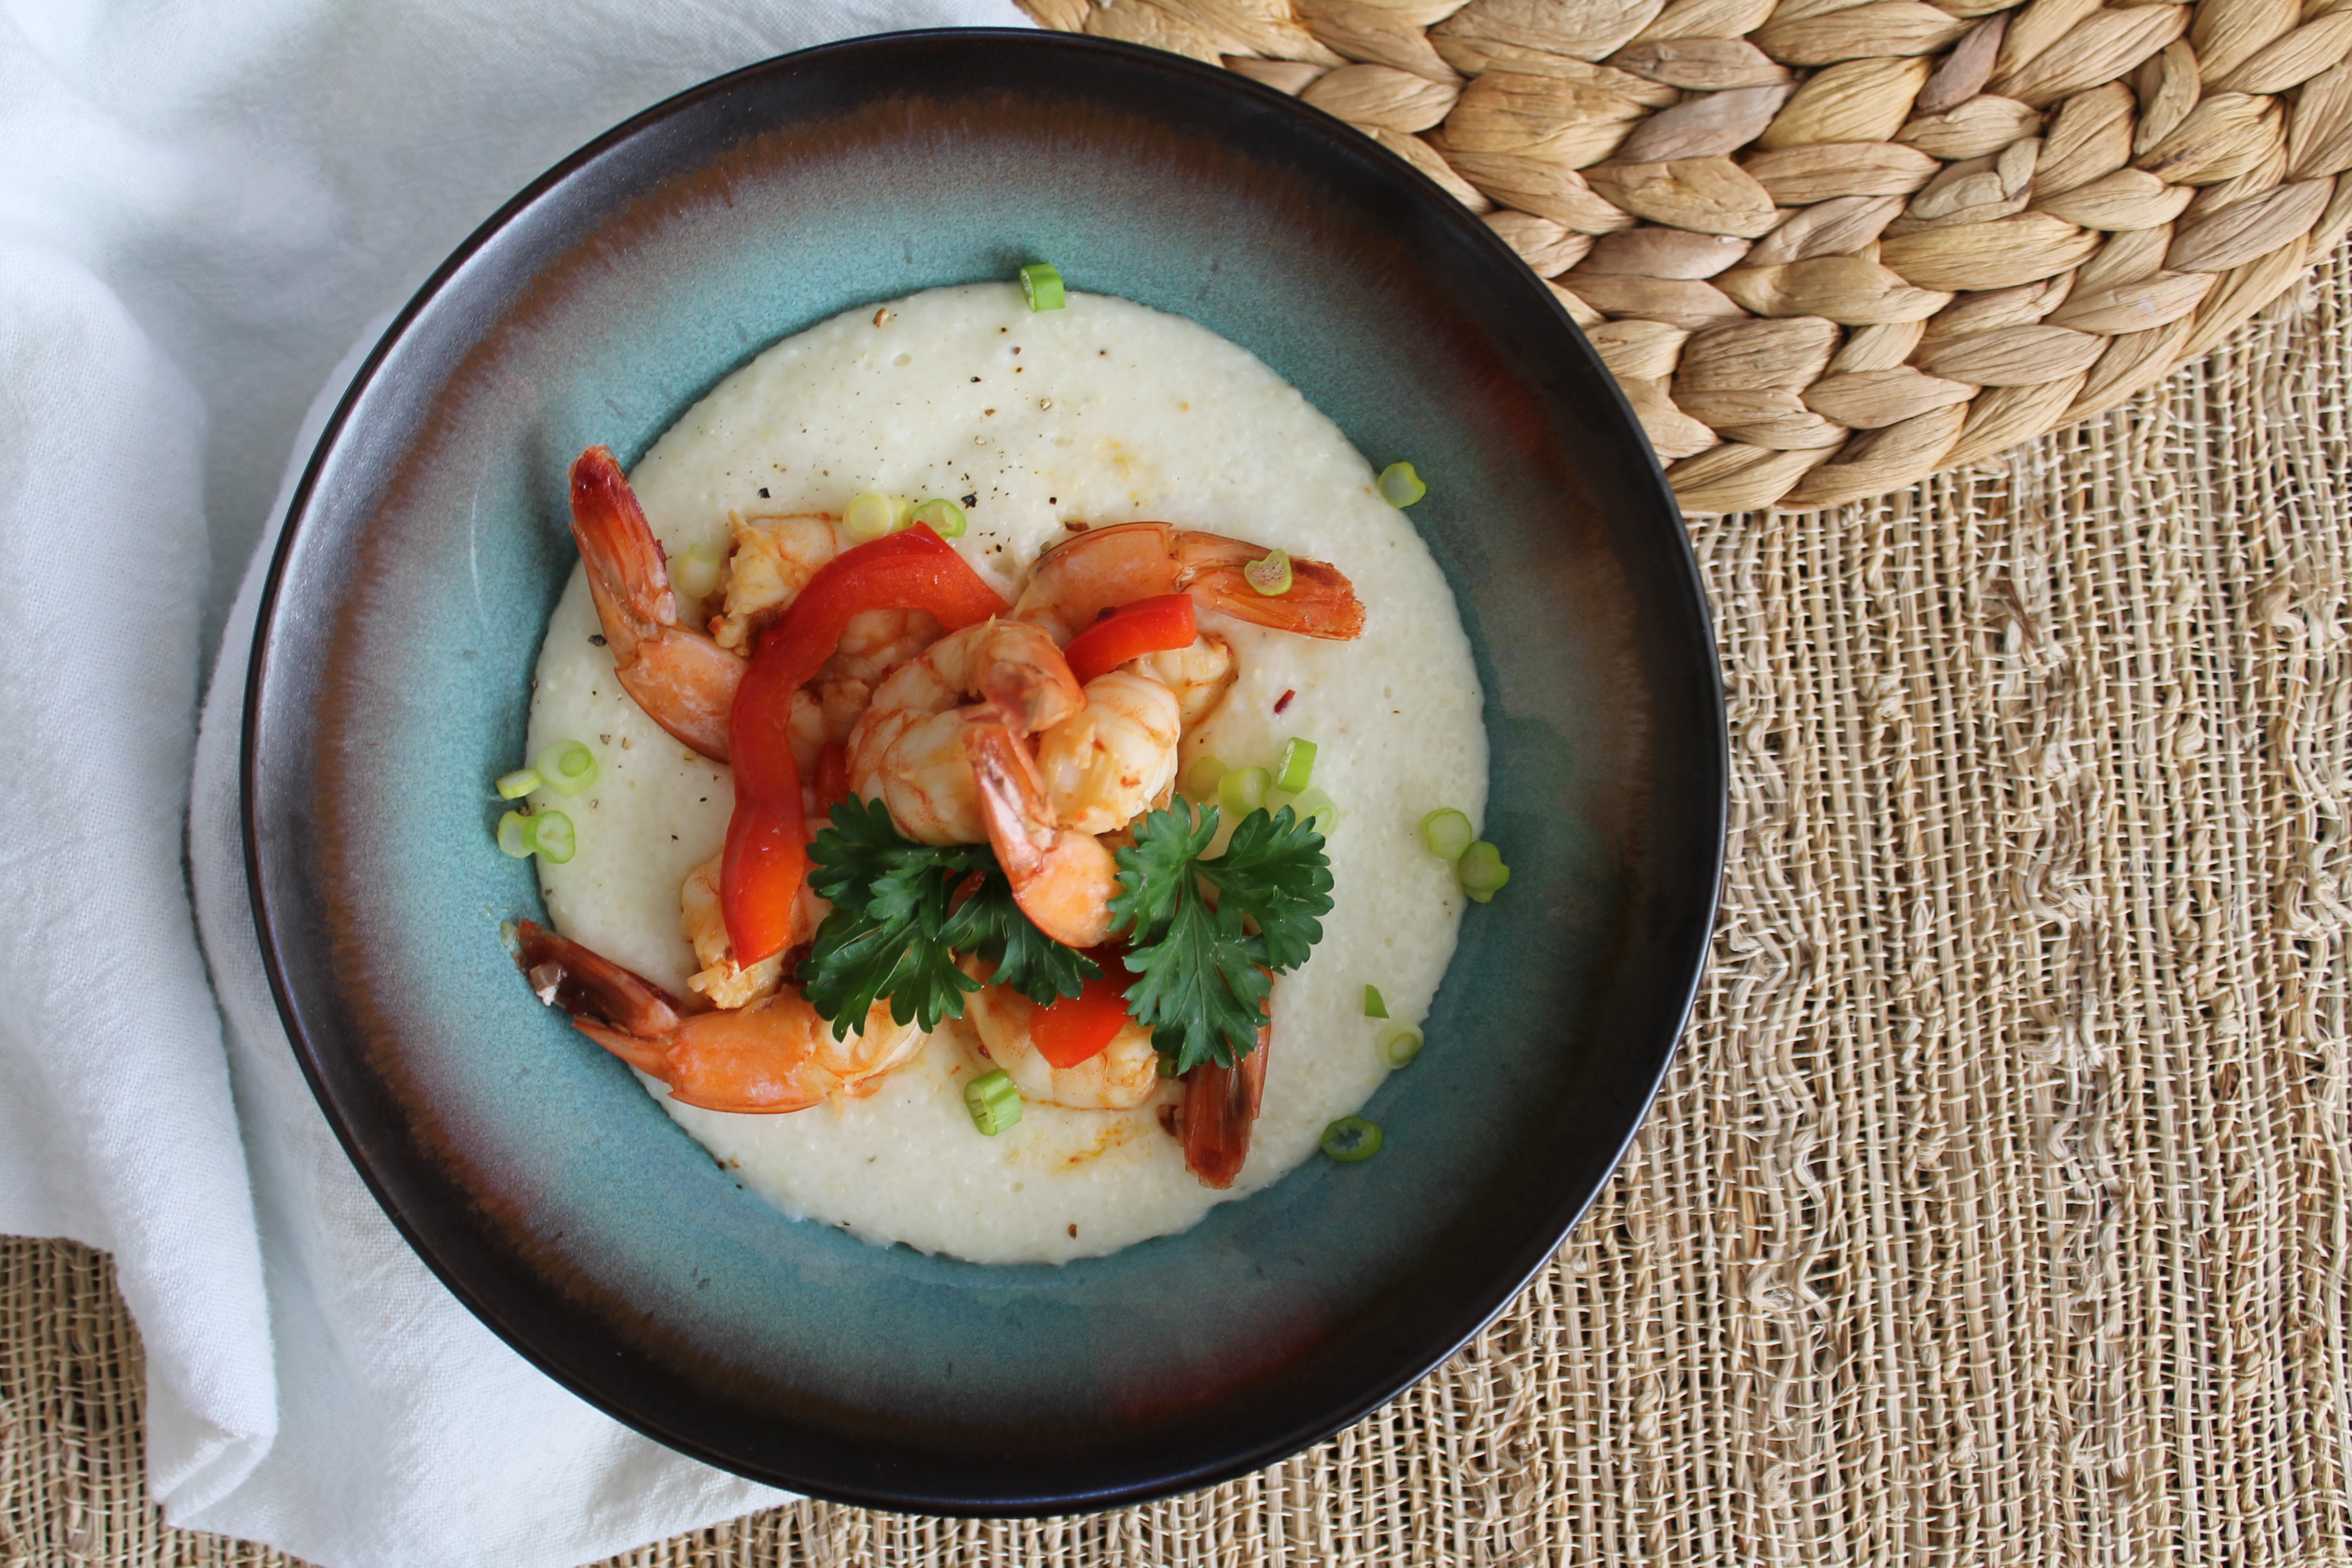 Honey Chipotle Shrimp and Grits